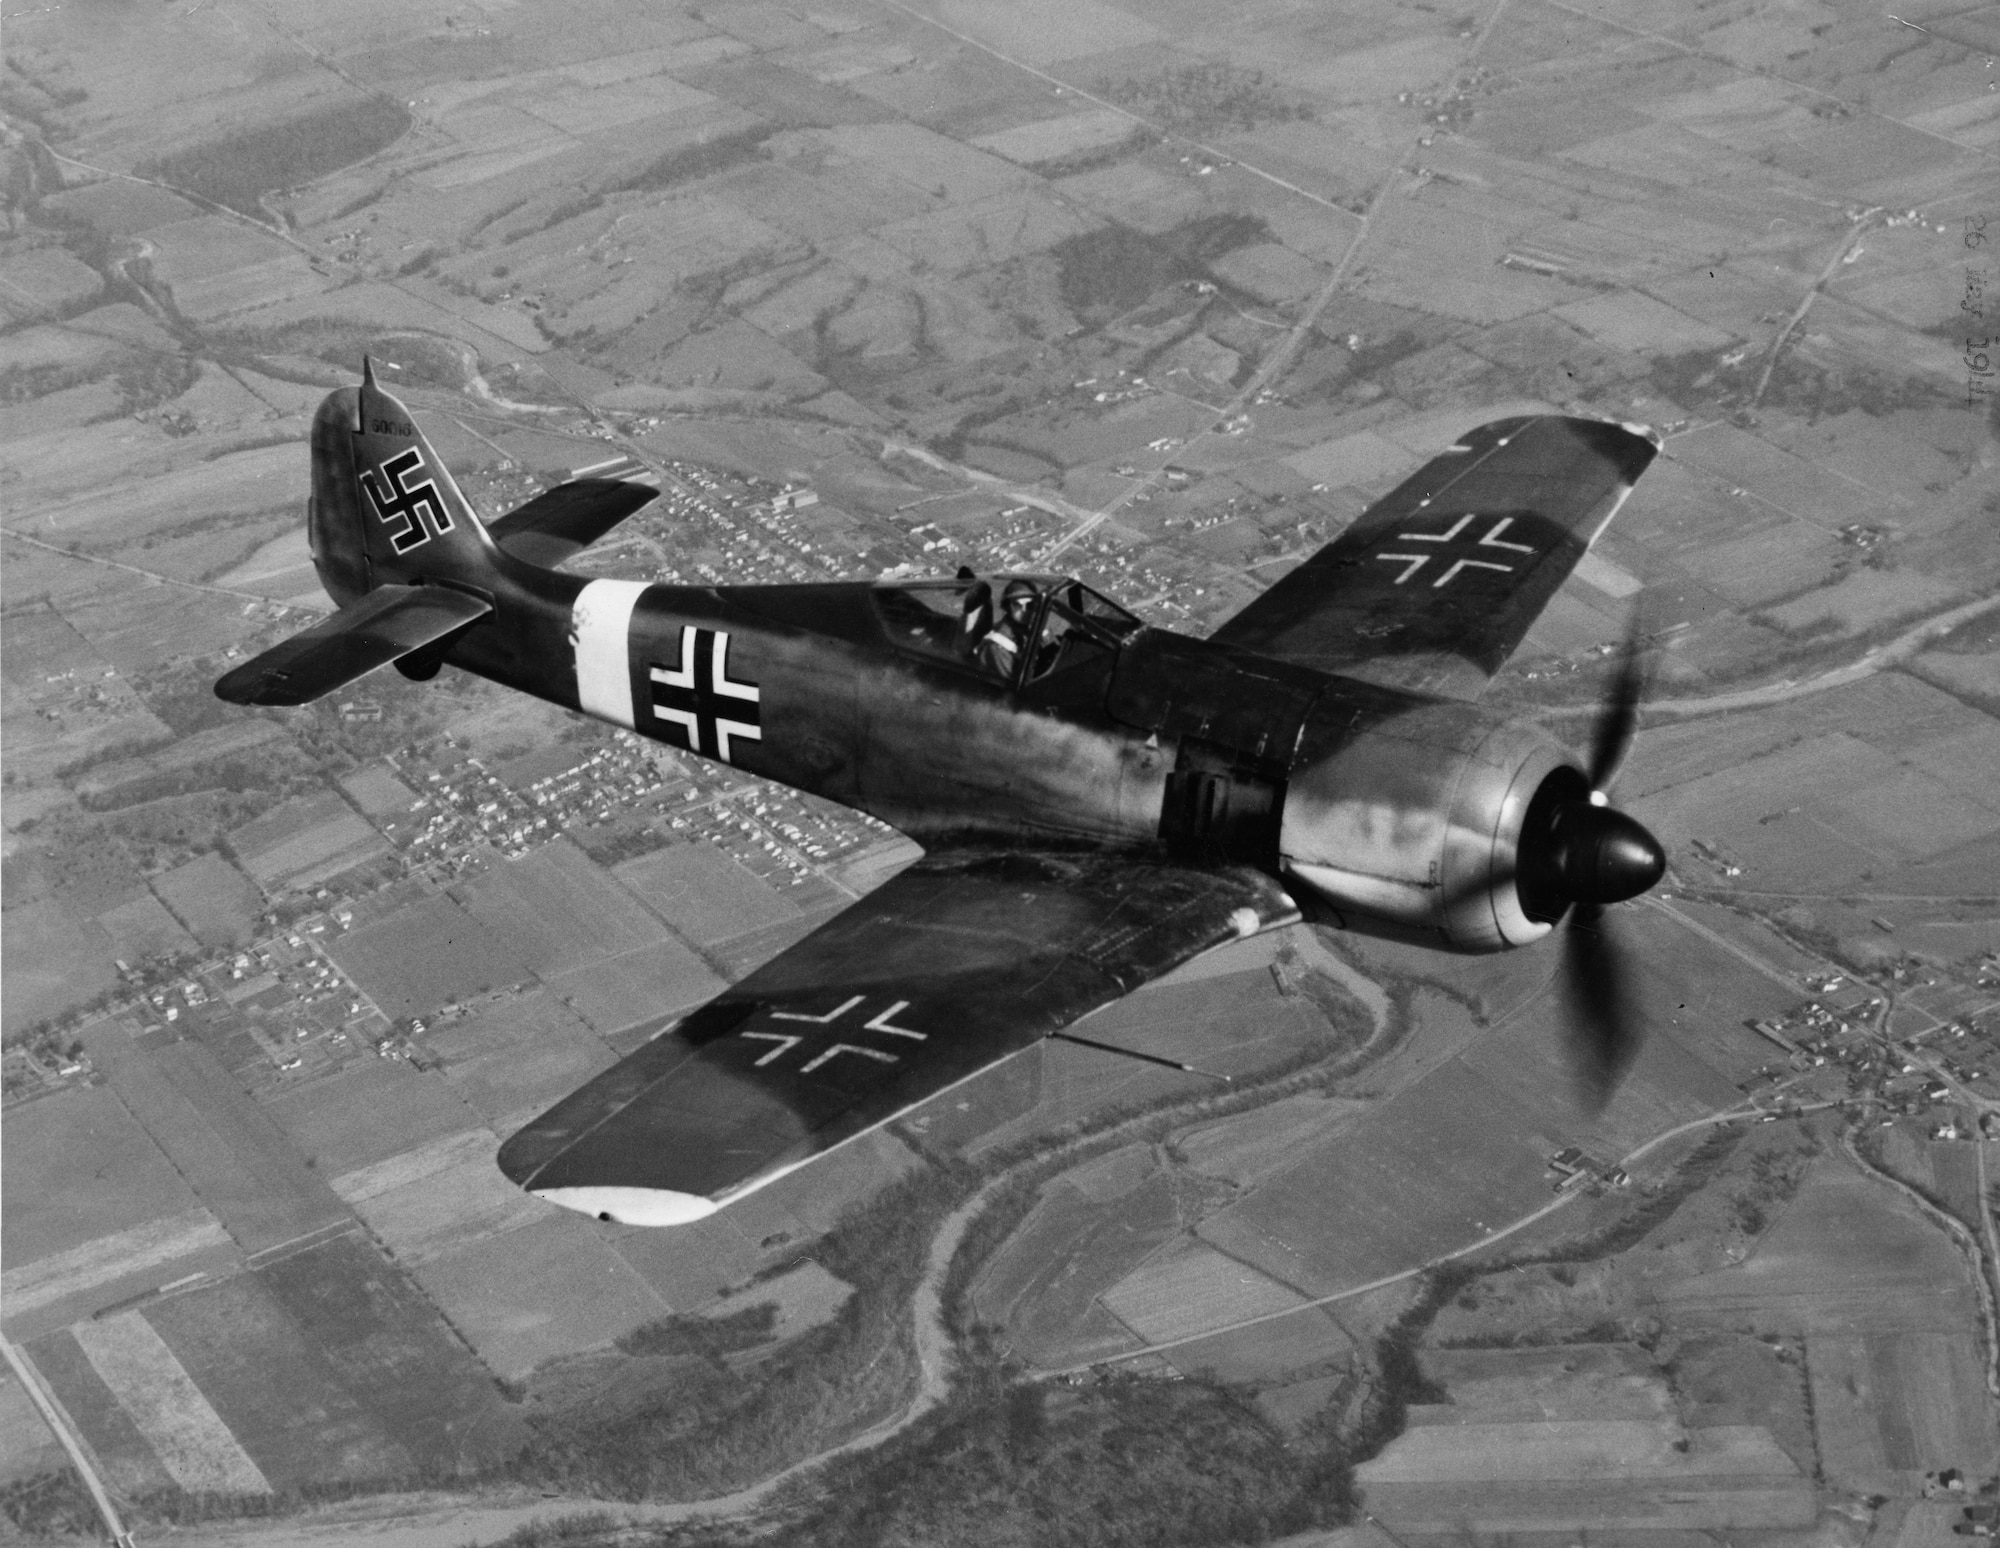 Fast and heavily armed, the Luftwaffe’s Focke-Wulf Fw 190 was a formidable opponent for the bomber crews.